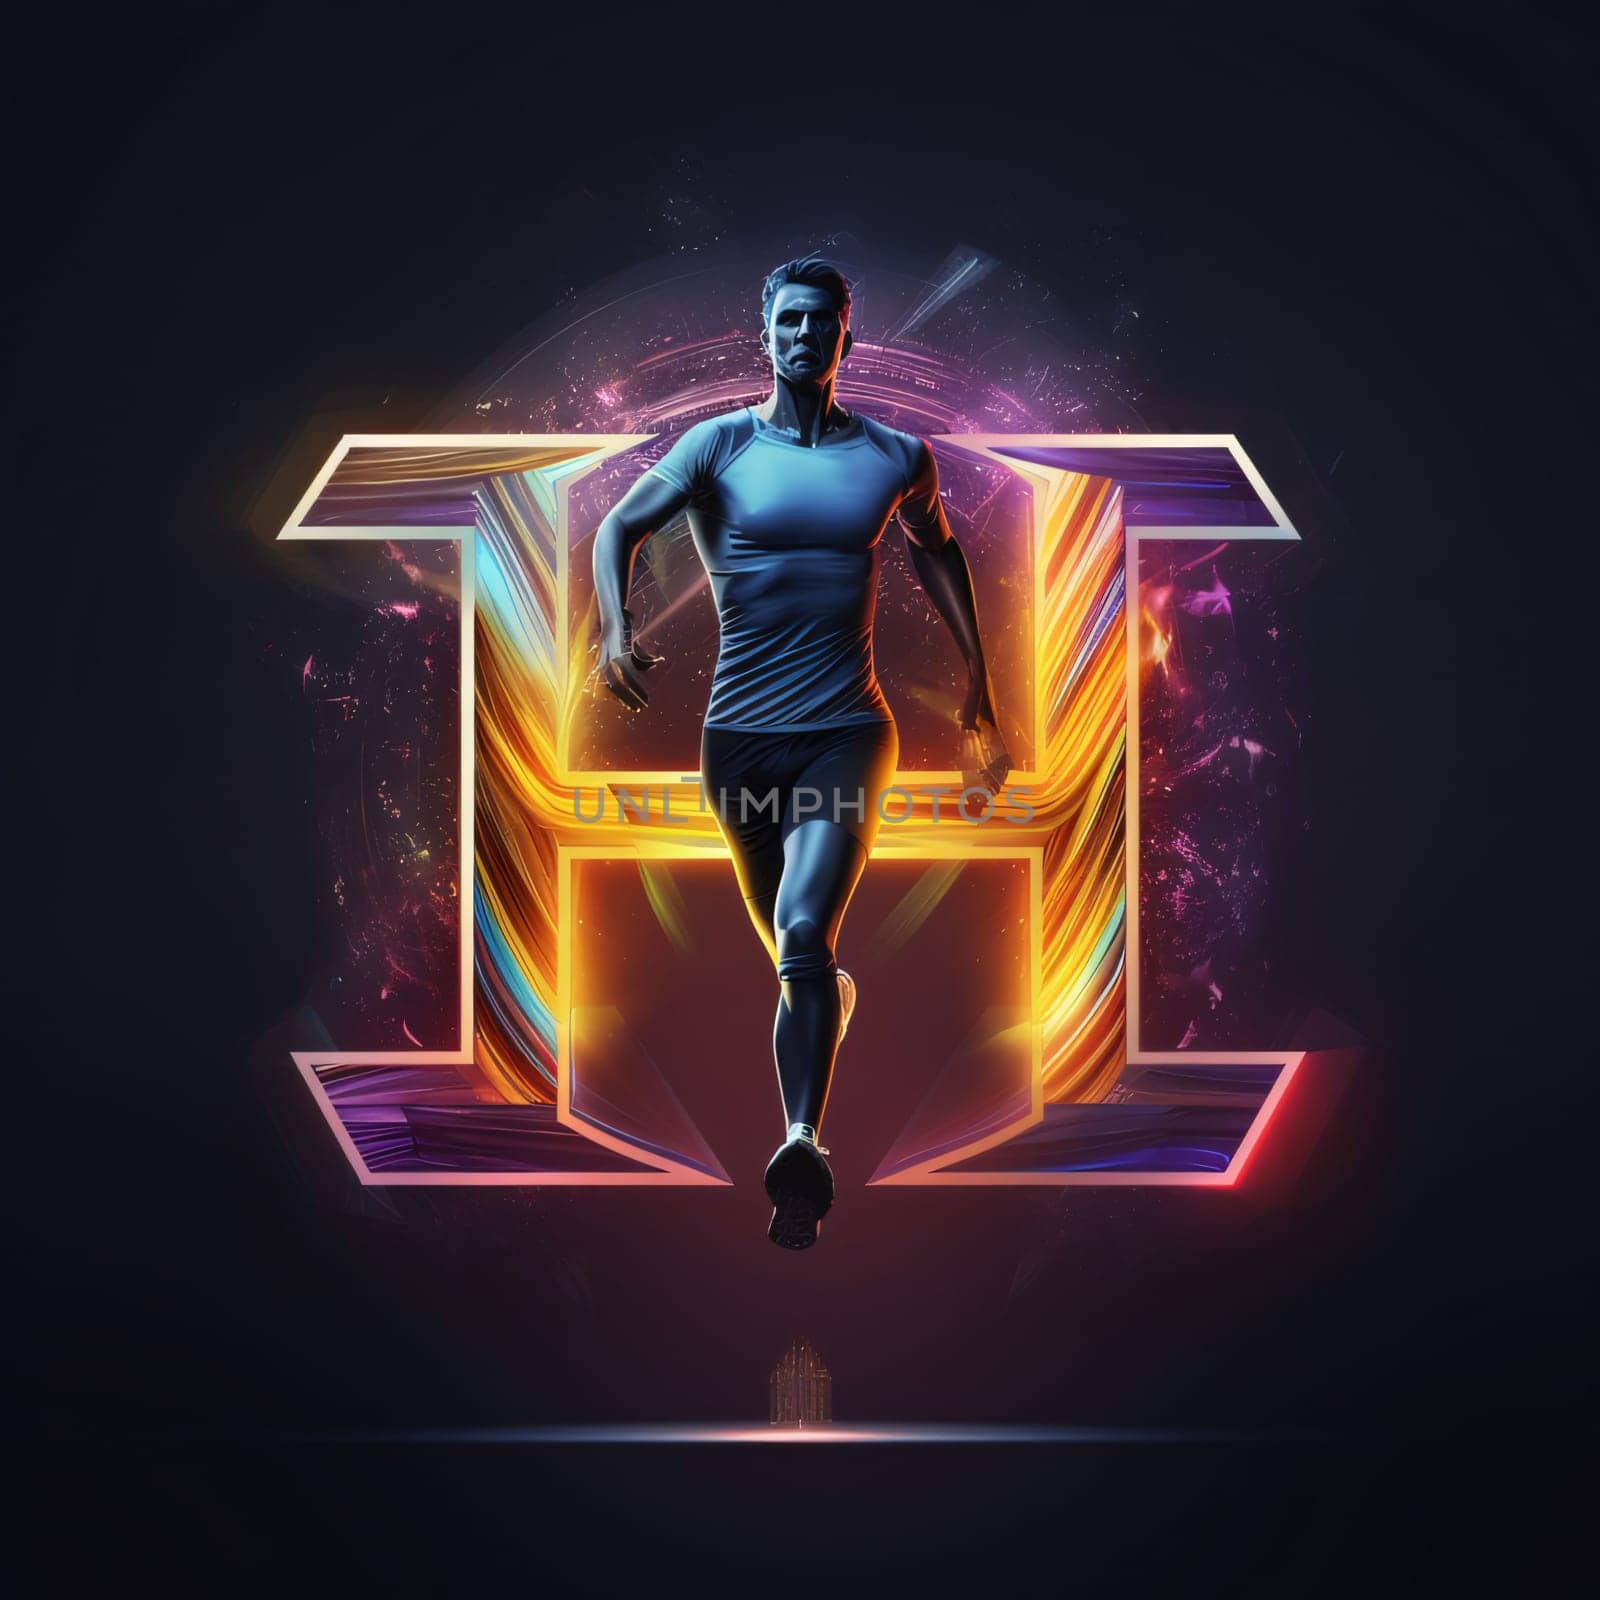 Graphic alphabet letters: Digital illustration of a running man in front of a luminous symbol